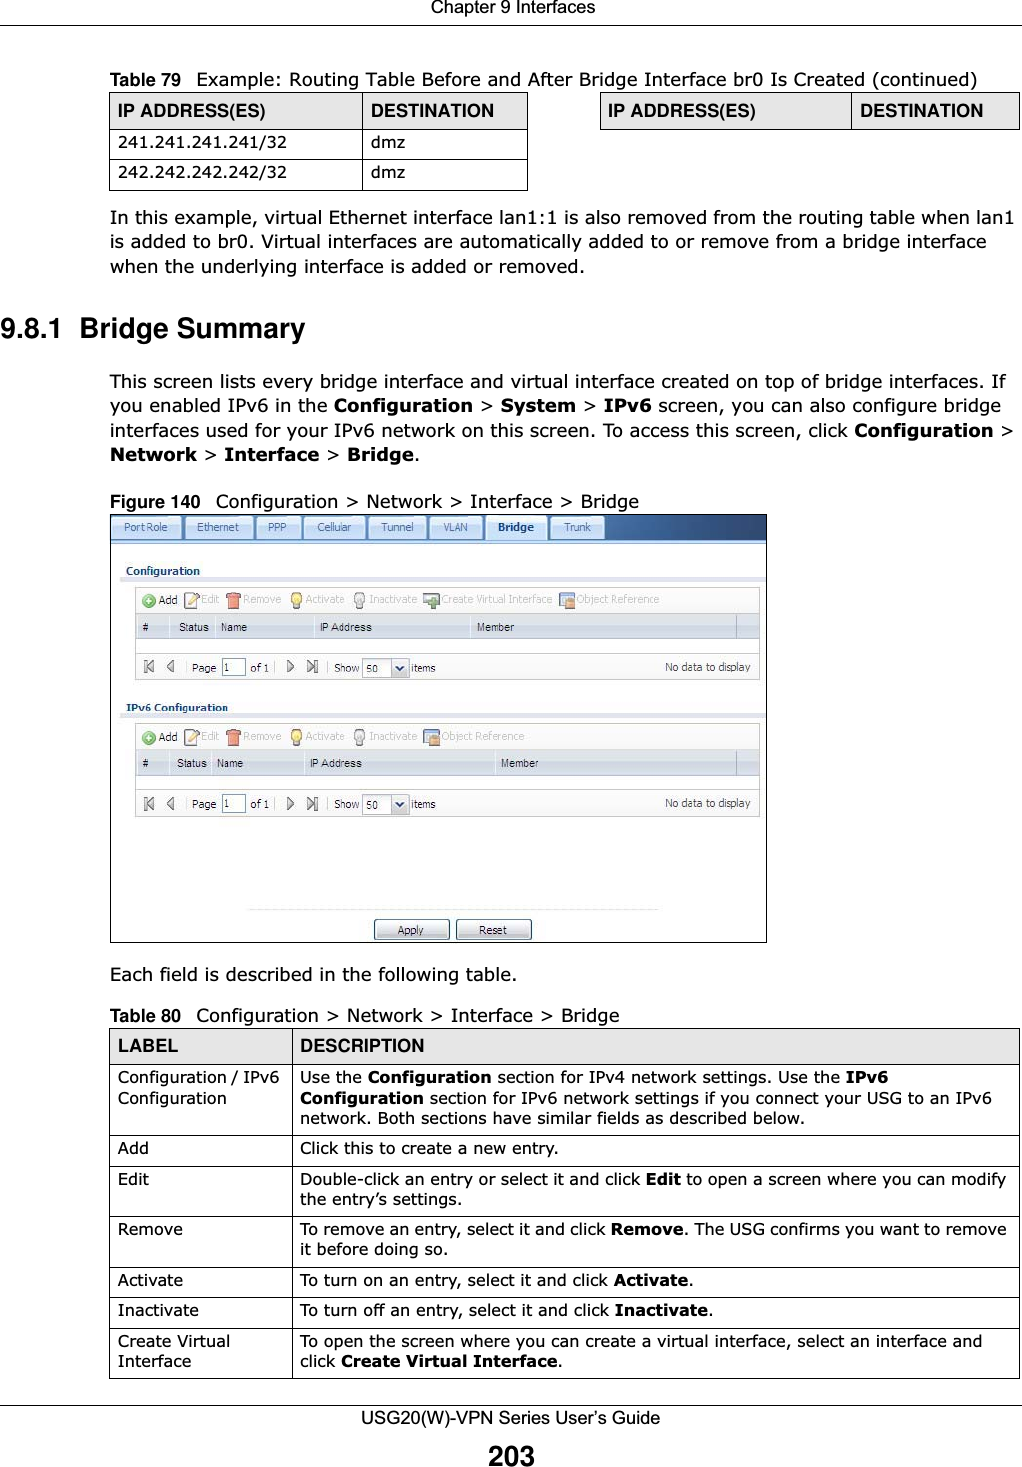  Chapter 9 InterfacesUSG20(W)-VPN Series User’s Guide203In this example, virtual Ethernet interface lan1:1 is also removed from the routing table when lan1 is added to br0. Virtual interfaces are automatically added to or remove from a bridge interface when the underlying interface is added or removed.9.8.1  Bridge SummaryThis screen lists every bridge interface and virtual interface created on top of bridge interfaces. If you enabled IPv6 in the Configuration &gt; System &gt; IPv6 screen, you can also configure bridge interfaces used for your IPv6 network on this screen. To access this screen, click Configuration &gt; Network &gt; Interface &gt; Bridge.Figure 140   Configuration &gt; Network &gt; Interface &gt; Bridge   Each field is described in the following table. 241.241.241.241/32 dmz242.242.242.242/32 dmzTable 79   Example: Routing Table Before and After Bridge Interface br0 Is Created (continued)IP ADDRESS(ES) DESTINATION IP ADDRESS(ES) DESTINATIONTable 80   Configuration &gt; Network &gt; Interface &gt; BridgeLABEL DESCRIPTIONConfiguration / IPv6 ConfigurationUse the Configuration section for IPv4 network settings. Use the IPv6 Configuration section for IPv6 network settings if you connect your USG to an IPv6 network. Both sections have similar fields as described below.Add Click this to create a new entry.Edit Double-click an entry or select it and click Edit to open a screen where you can modify the entry’s settings. Remove To remove an entry, select it and click Remove. The USG confirms you want to remove it before doing so.Activate To turn on an entry, select it and click Activate.Inactivate To turn off an entry, select it and click Inactivate.Create Virtual InterfaceTo open the screen where you can create a virtual interface, select an interface and click Create Virtual Interface.